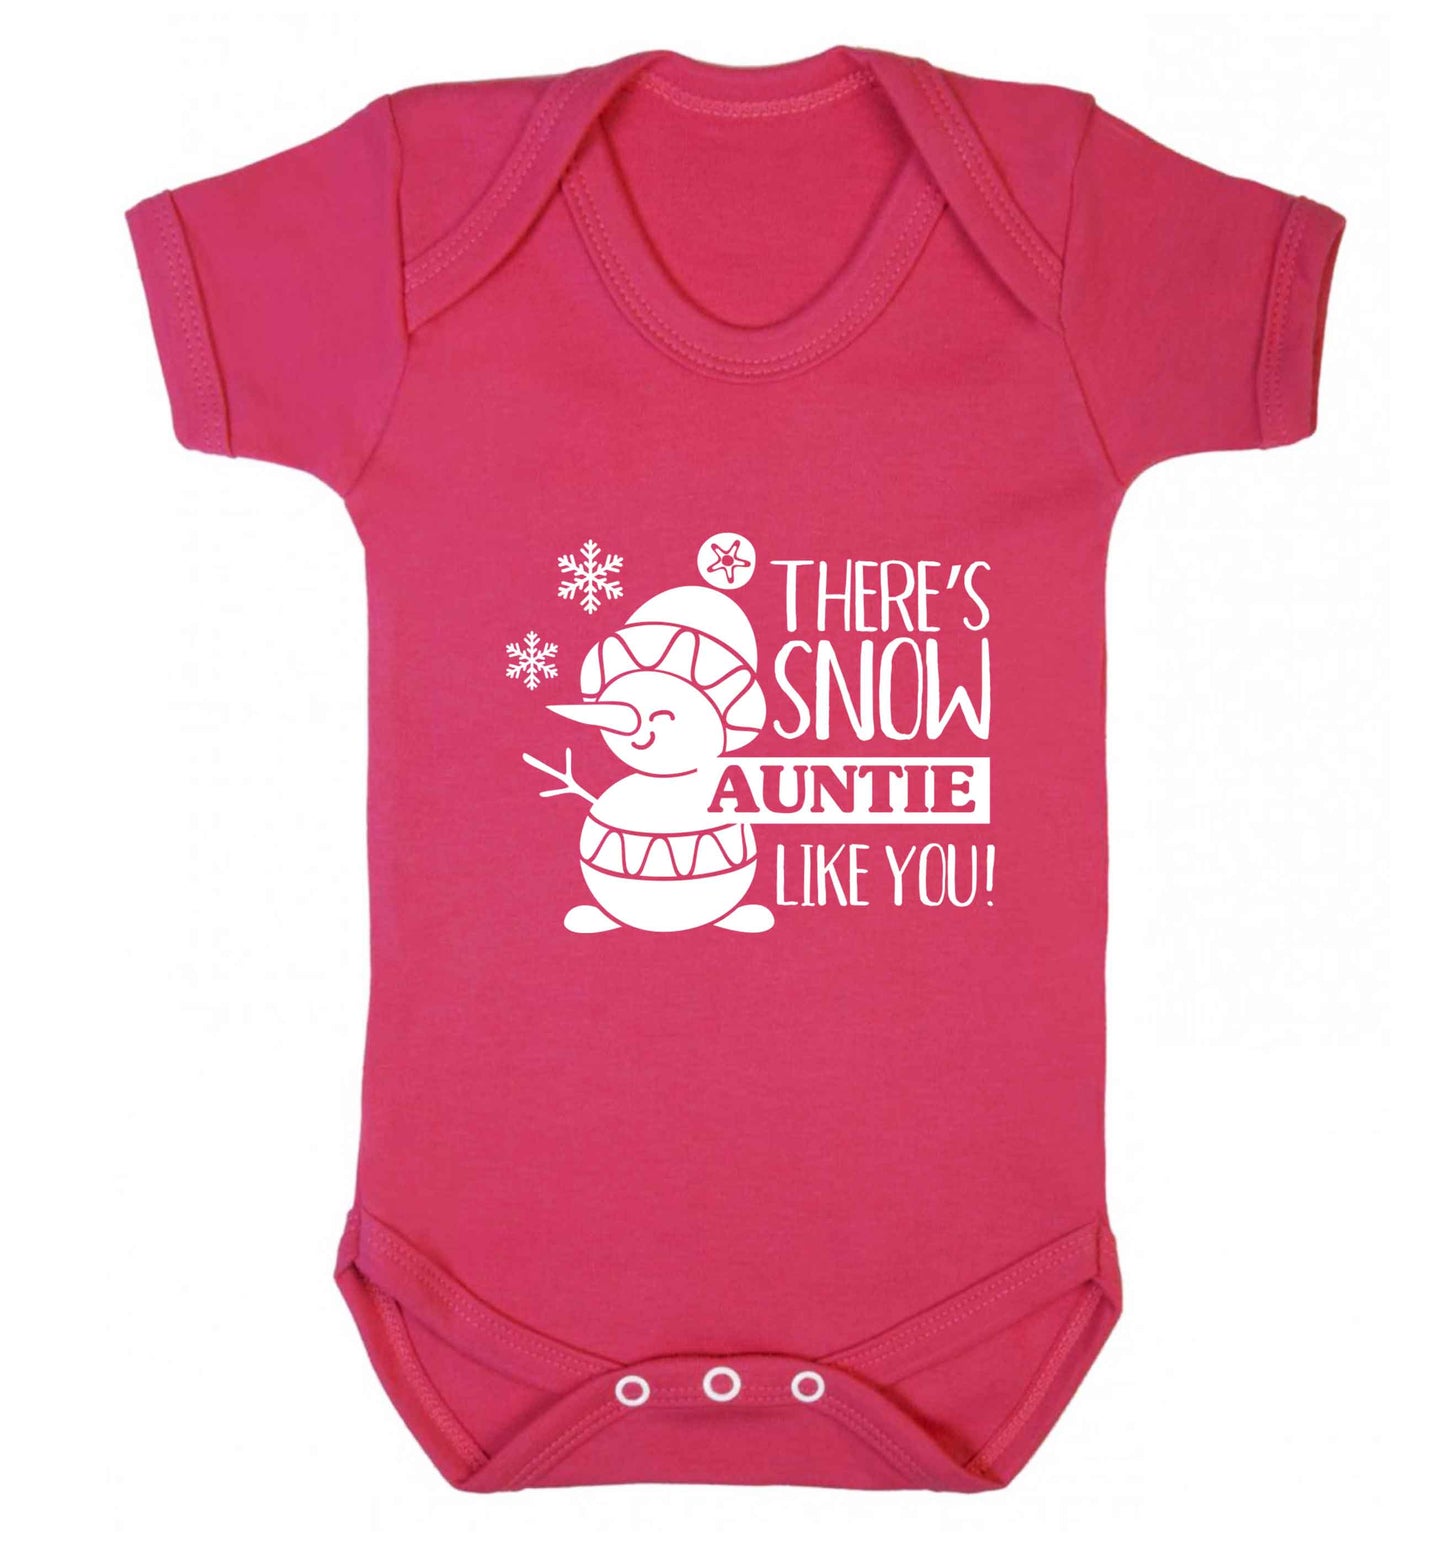 There's snow auntie like you baby vest dark pink 18-24 months